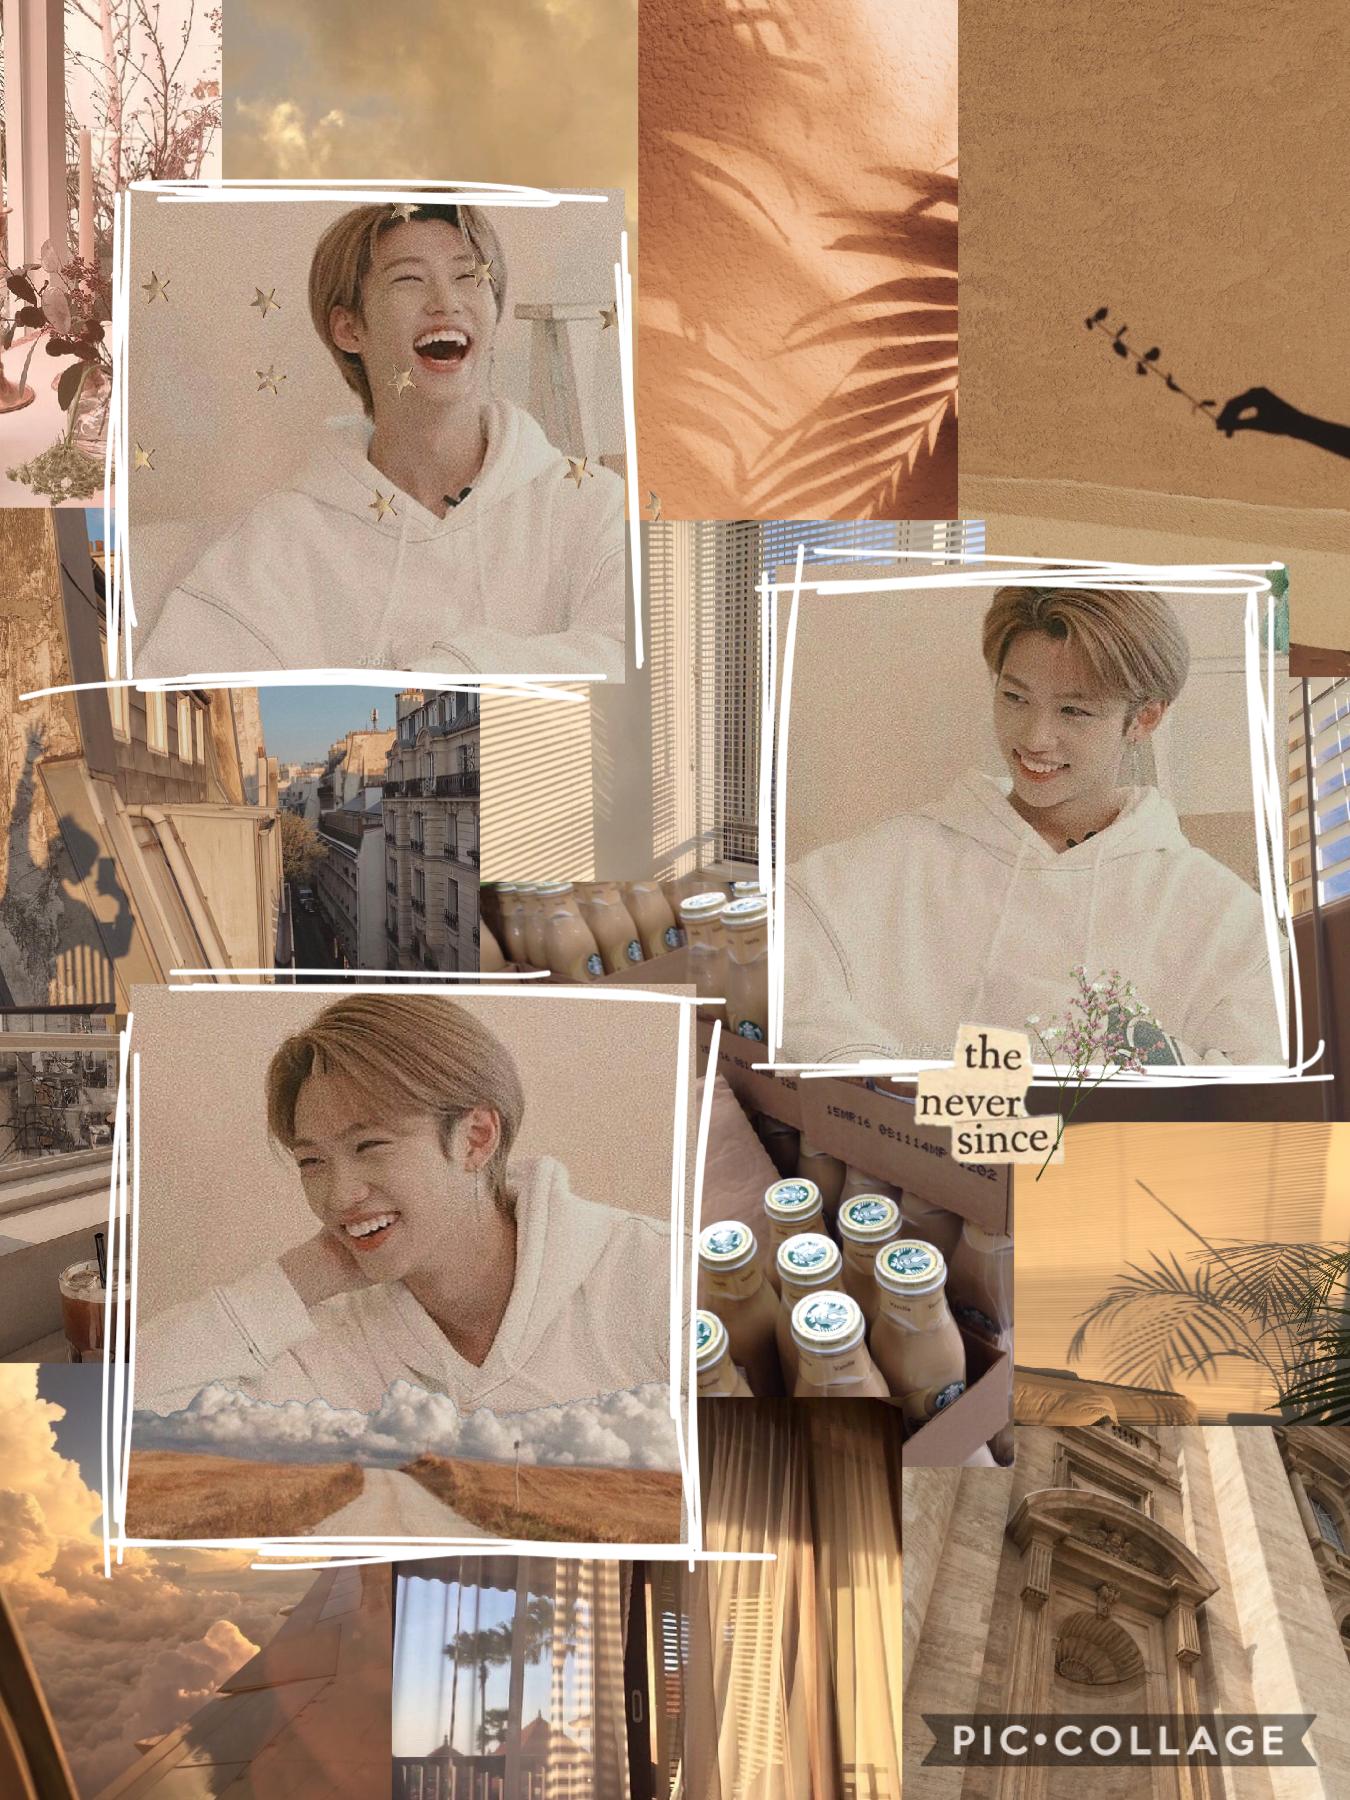 welcome to felix's cafe, open up 🍵 

이용복 // lee felix // lee yongbok @(・●・)@

i'm back, everybody :D i haven't posted in so long, it's crazy. this is my first felix collage i've done, and i'm pretty proud of it! 

how are you guys? stay safe, everyone, it